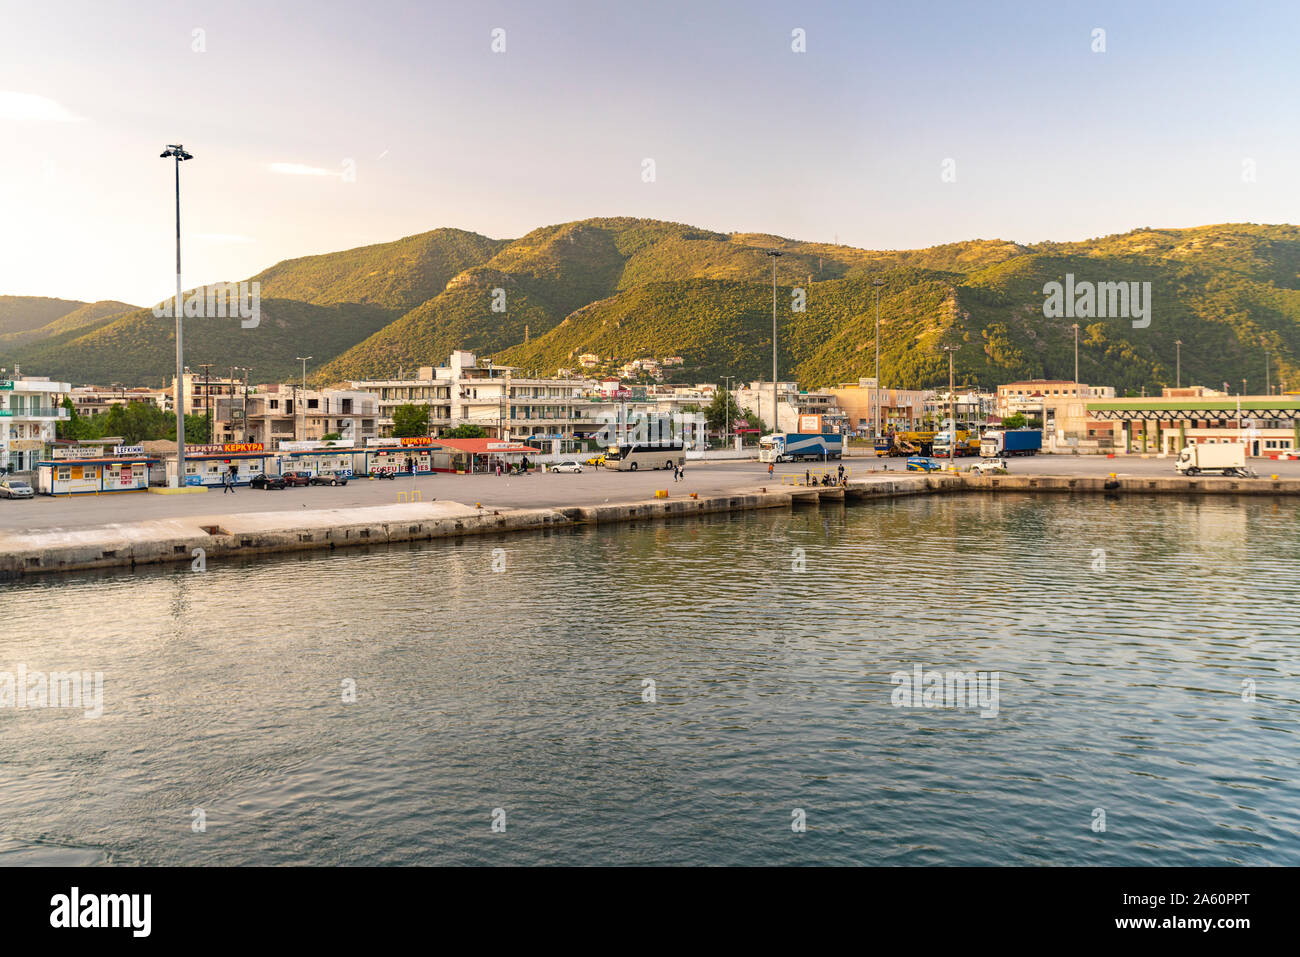 Scenic view of buildings by sea against mountains in Corfu, Greece Stock Photo